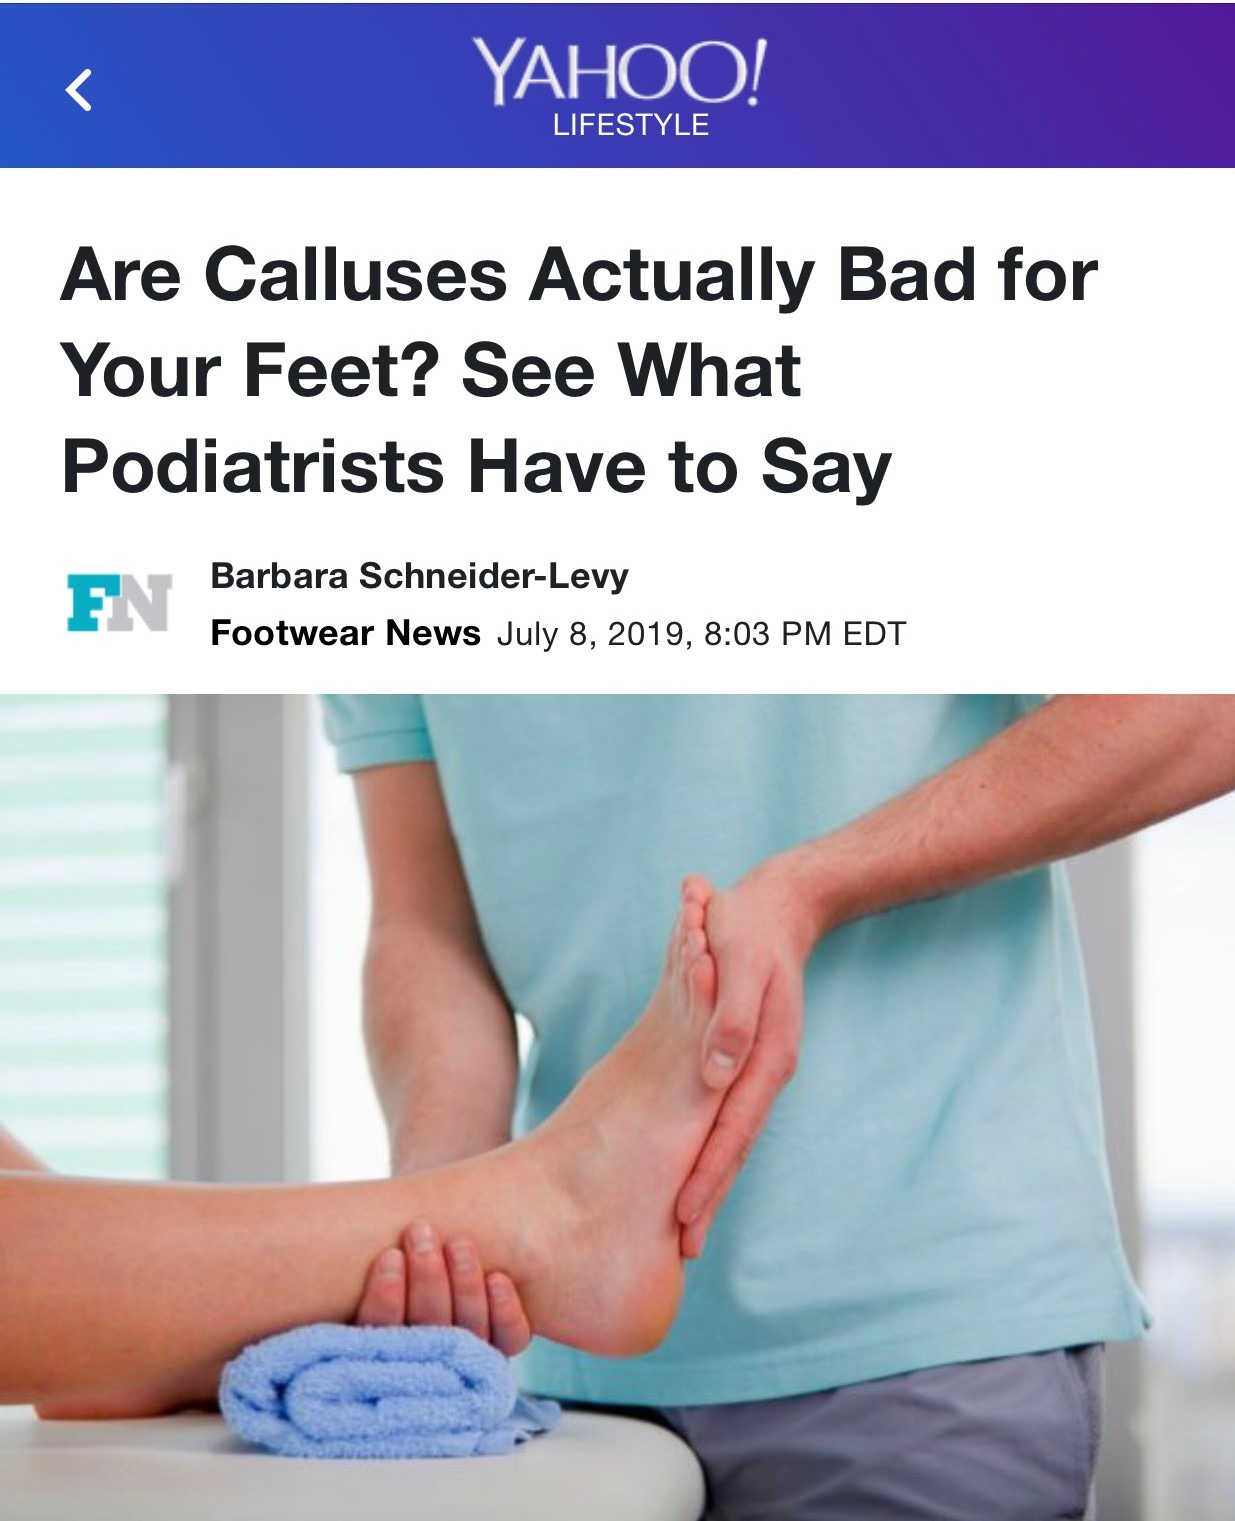 Are Calluses Actually Bad for Your Feet? See What Podiatrists Have to Say